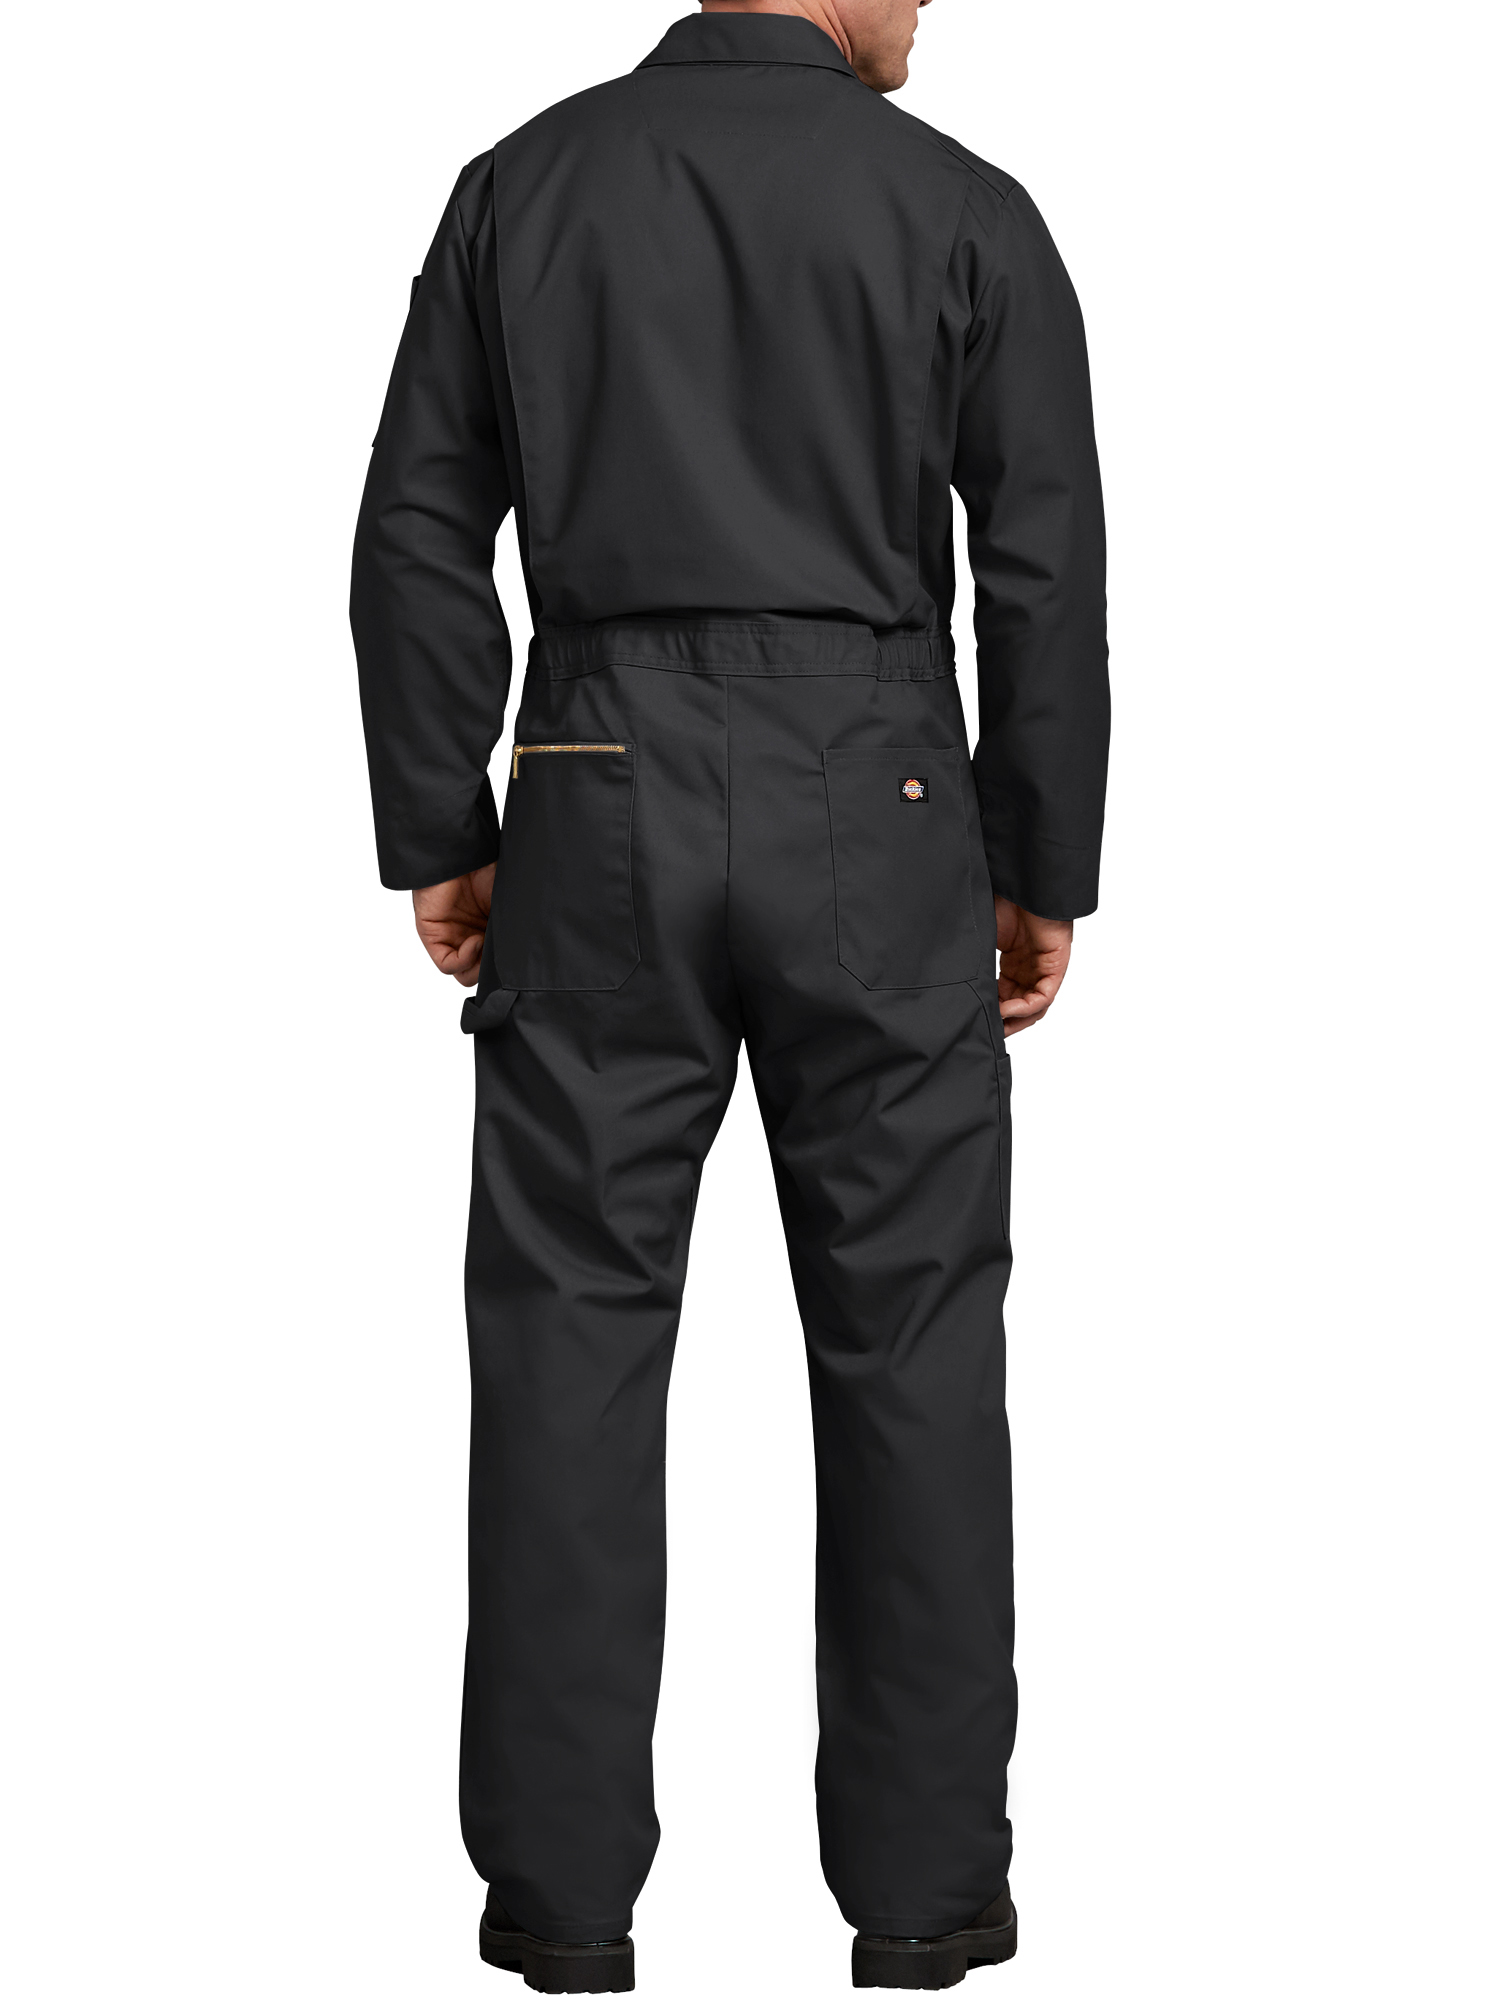 Dickies Mens and Big Mens Deluxe Blended Long Sleeve Coveralls - image 2 of 2